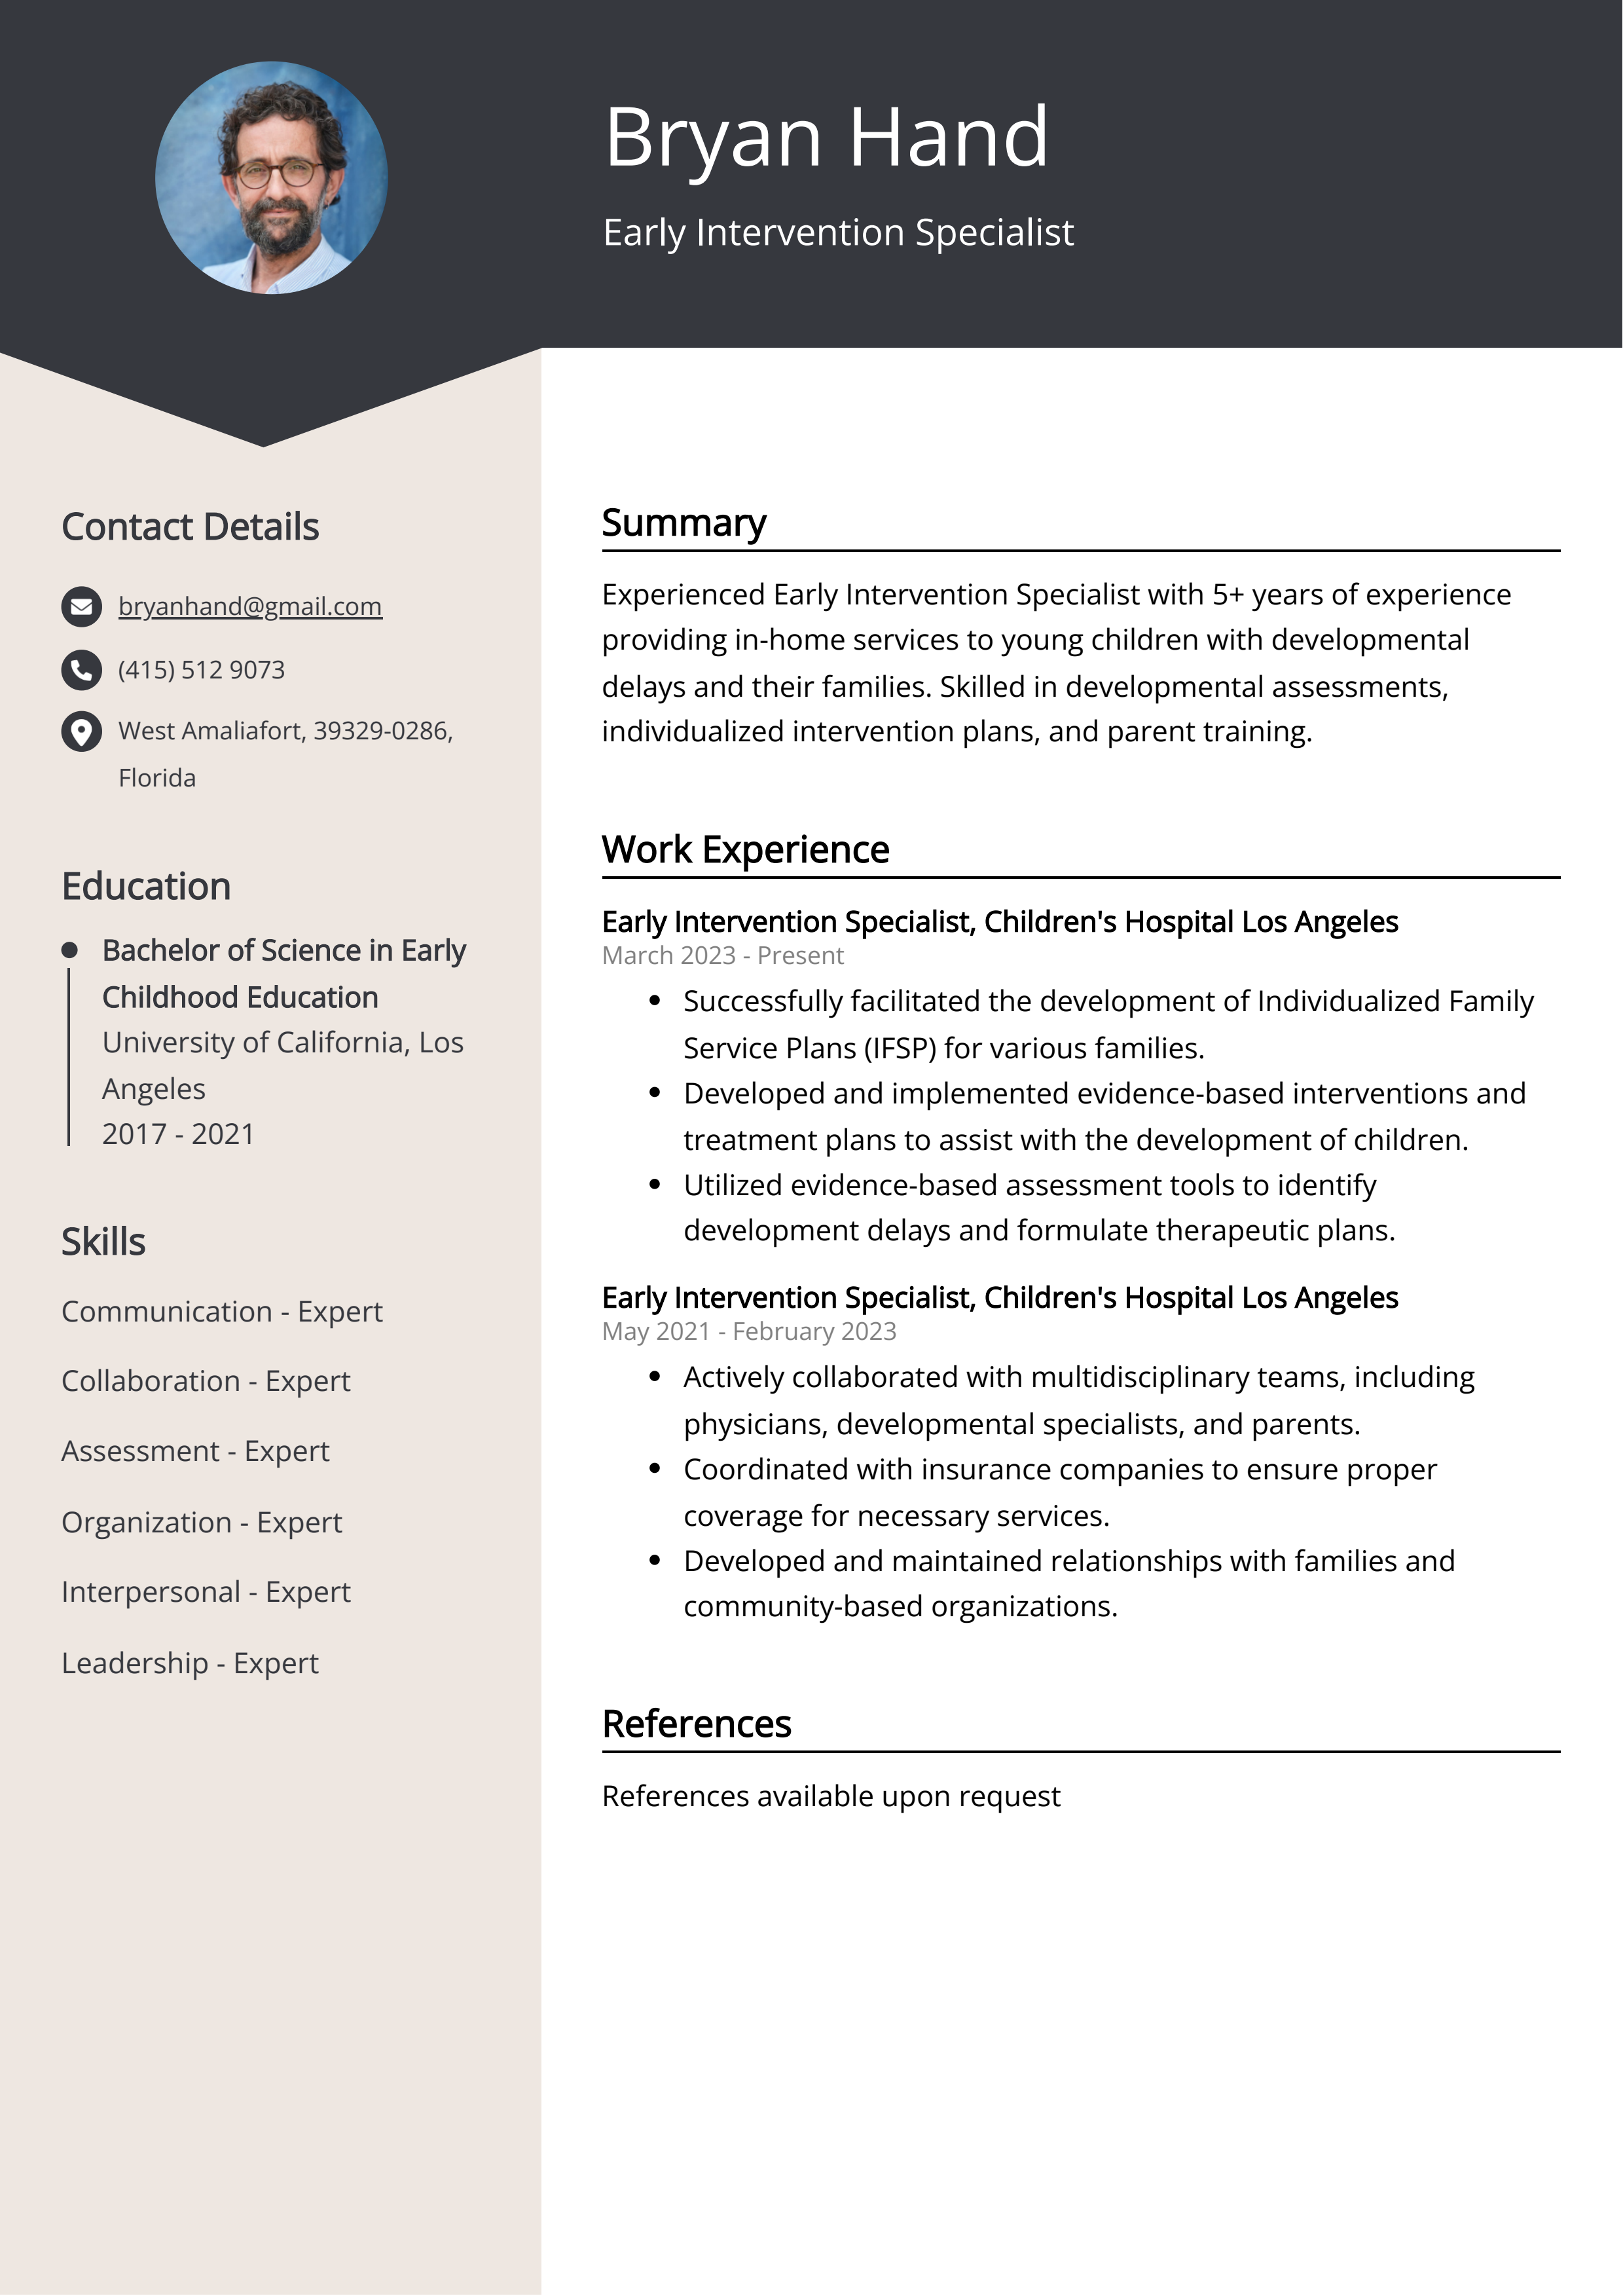 Early Intervention Specialist CV Example